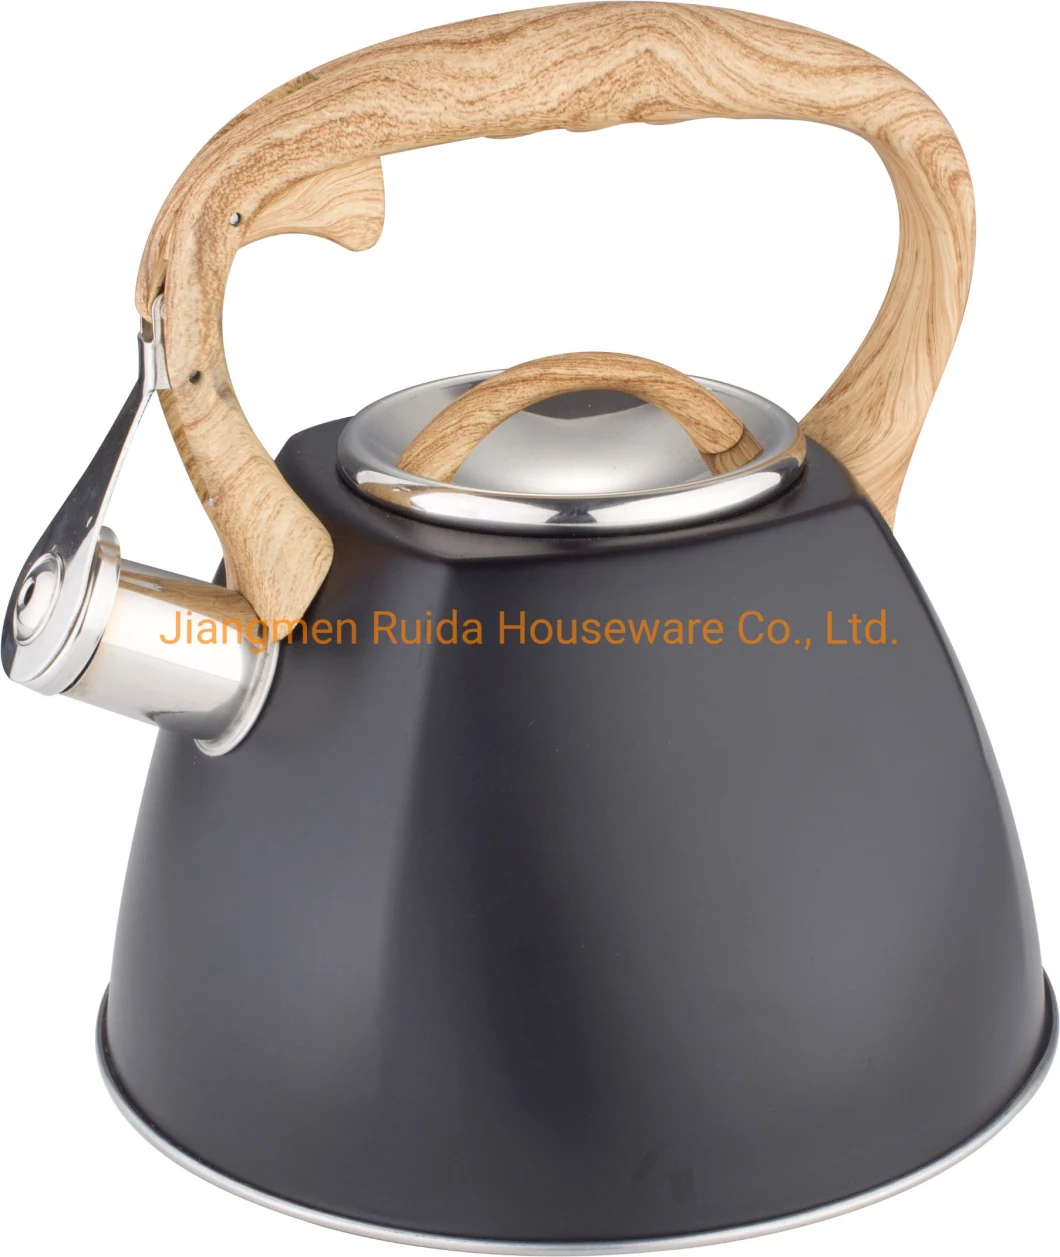 Marble Coating Kitchen Master Class Whistling Kettle Stainless Steel with Black Nylon Handle